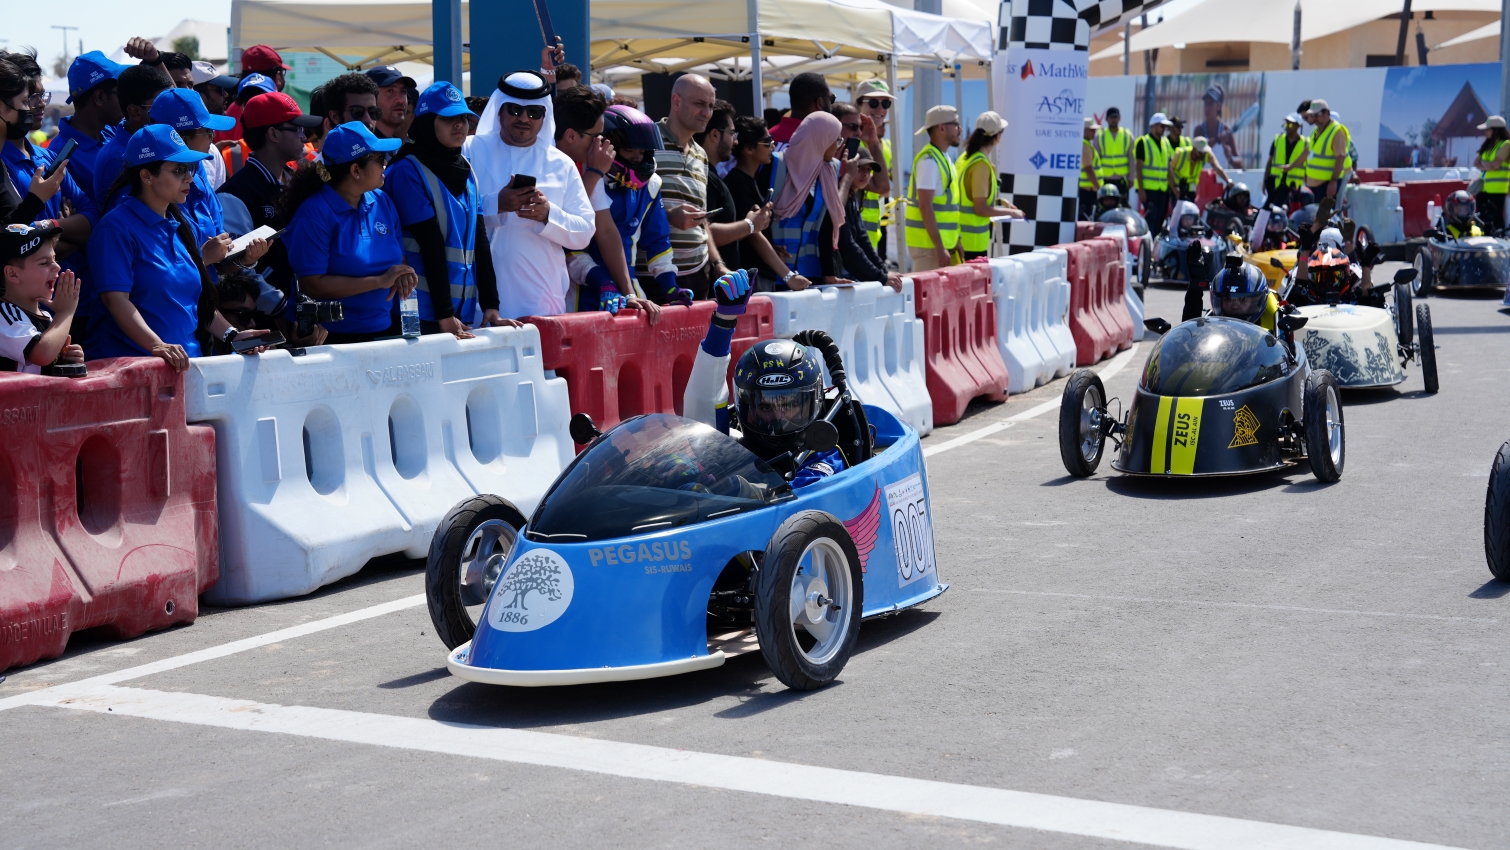 The UAE Electric Vehicle Grand Prix Set For March 2 In Abu Dhabi